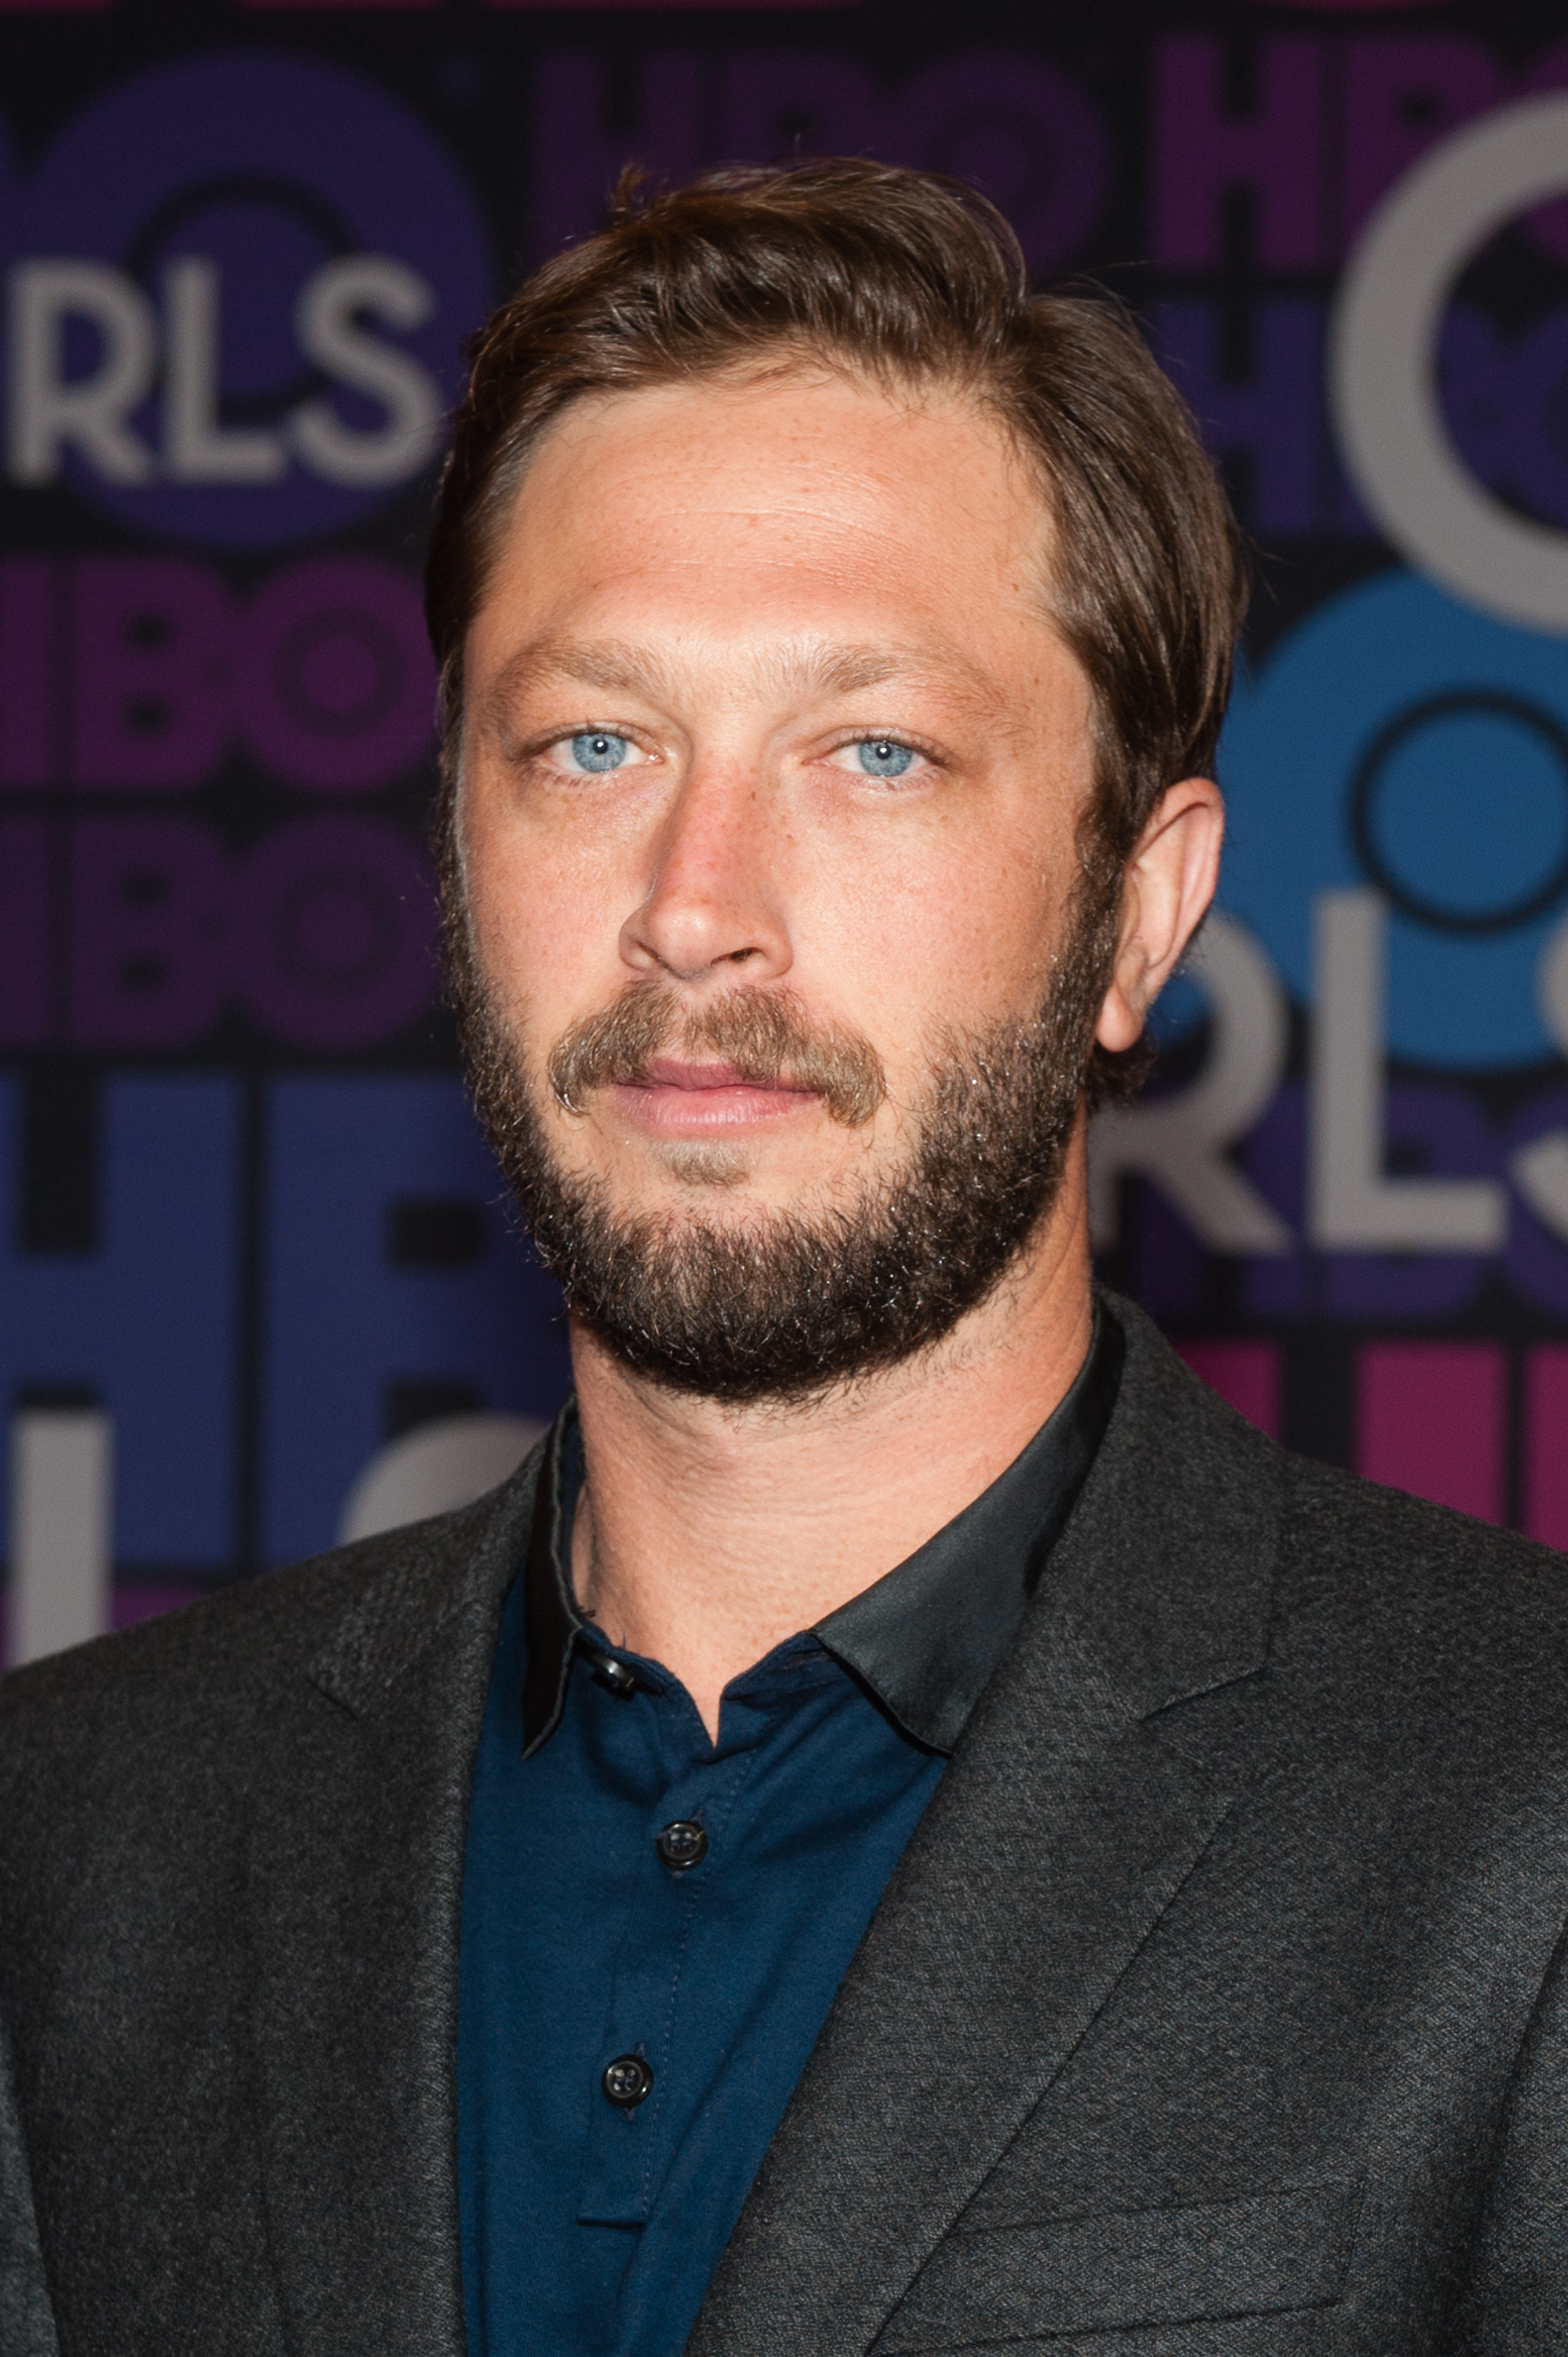 Ebon Moss-Bachrach in a blazer and collared shirt at the Girls Season 4 premiere. He had a beard and short styled hair